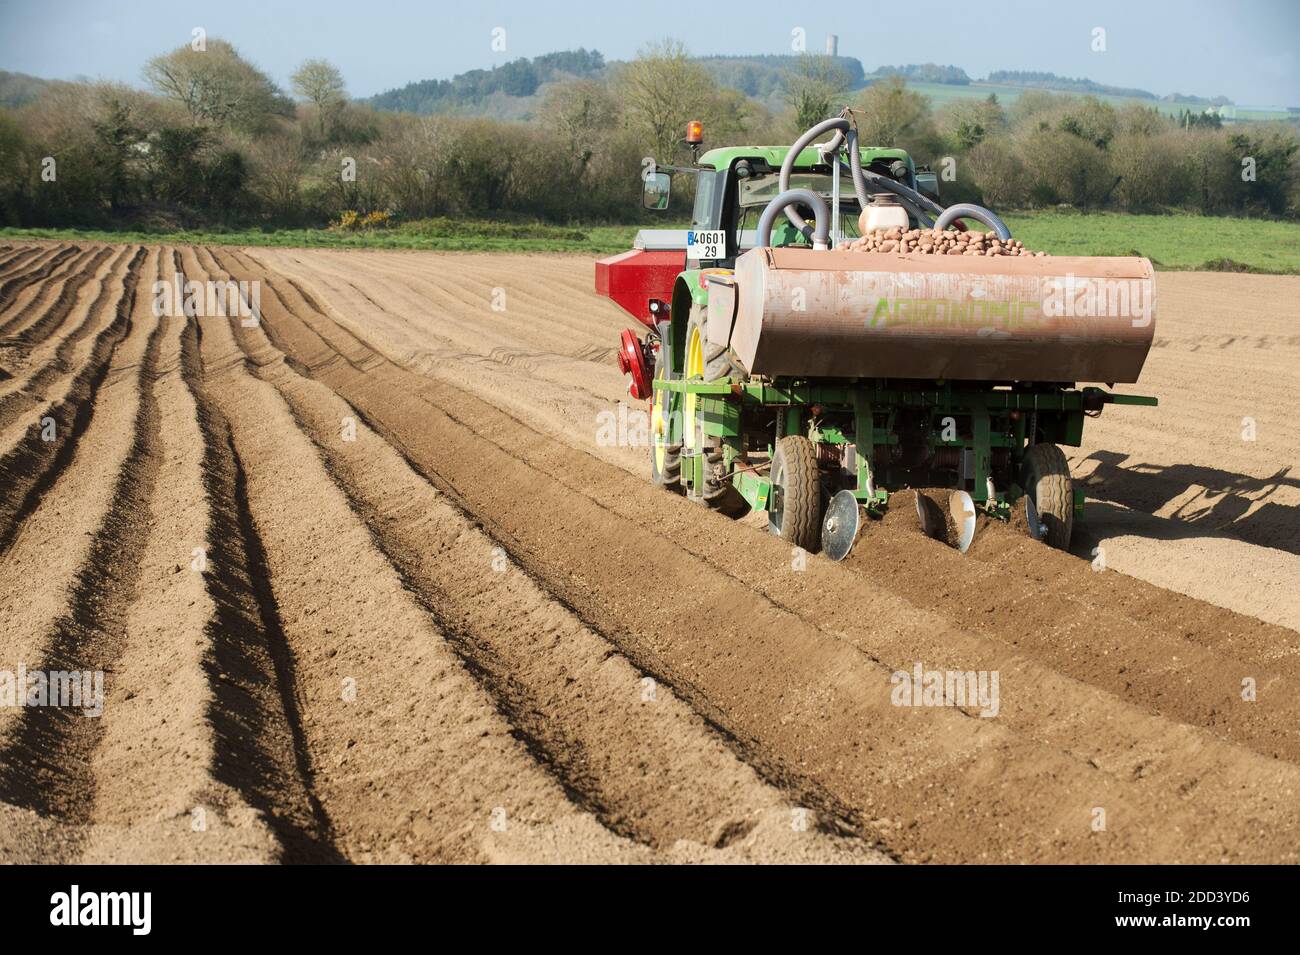 Irvillac (Brittany, north-western France): production of potato seeds. Tractor with muckspreader Stock Photo